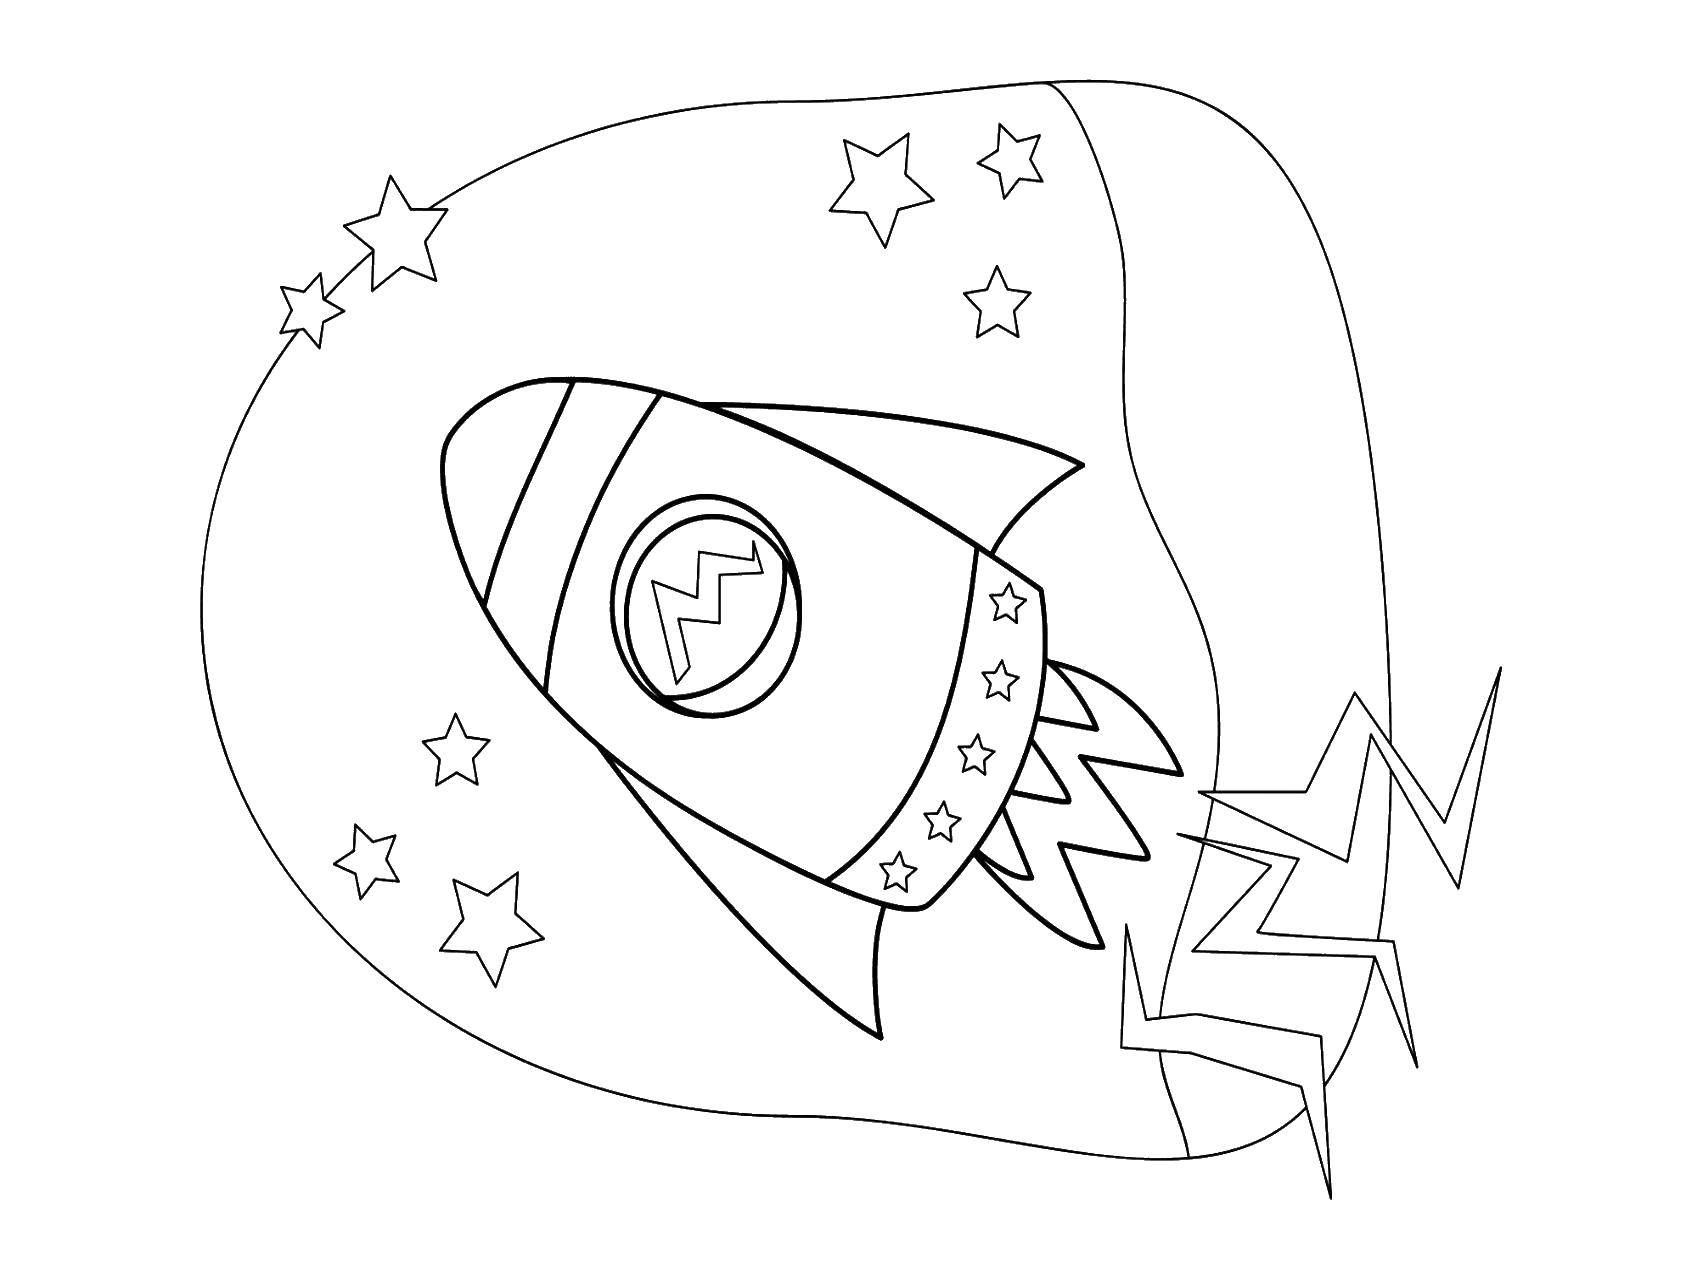 Coloring Rocket in space. Category rocket. Tags:  rocket, space.